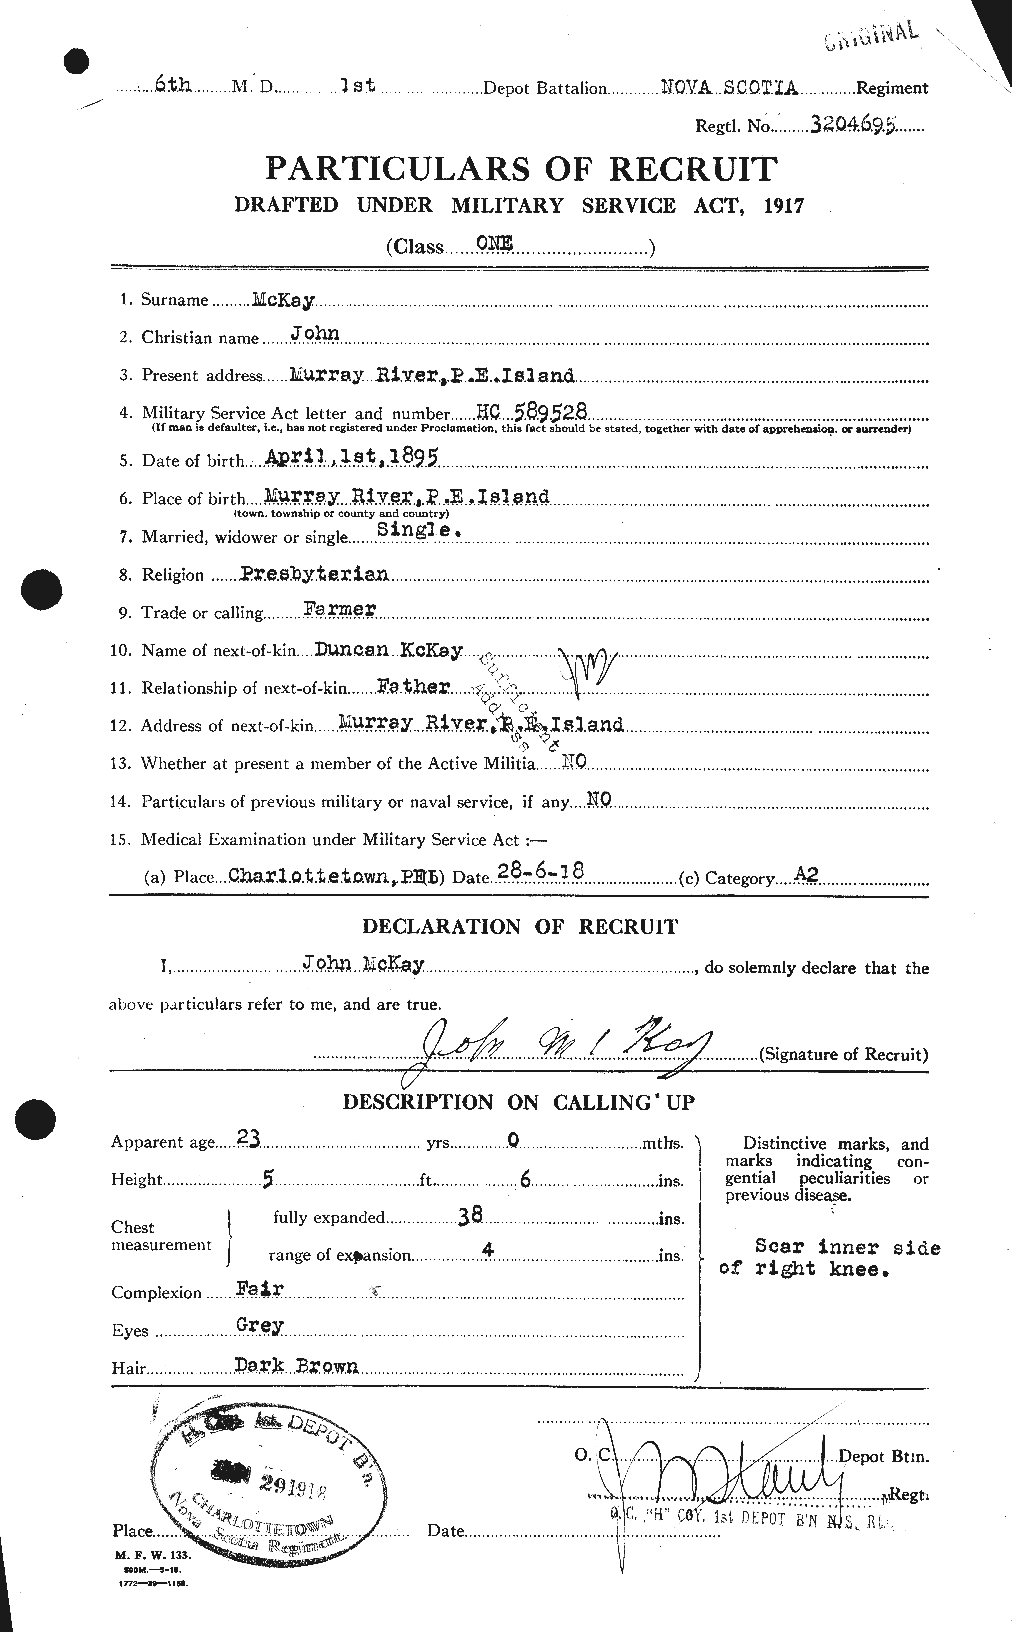 Personnel Records of the First World War - CEF 526997a